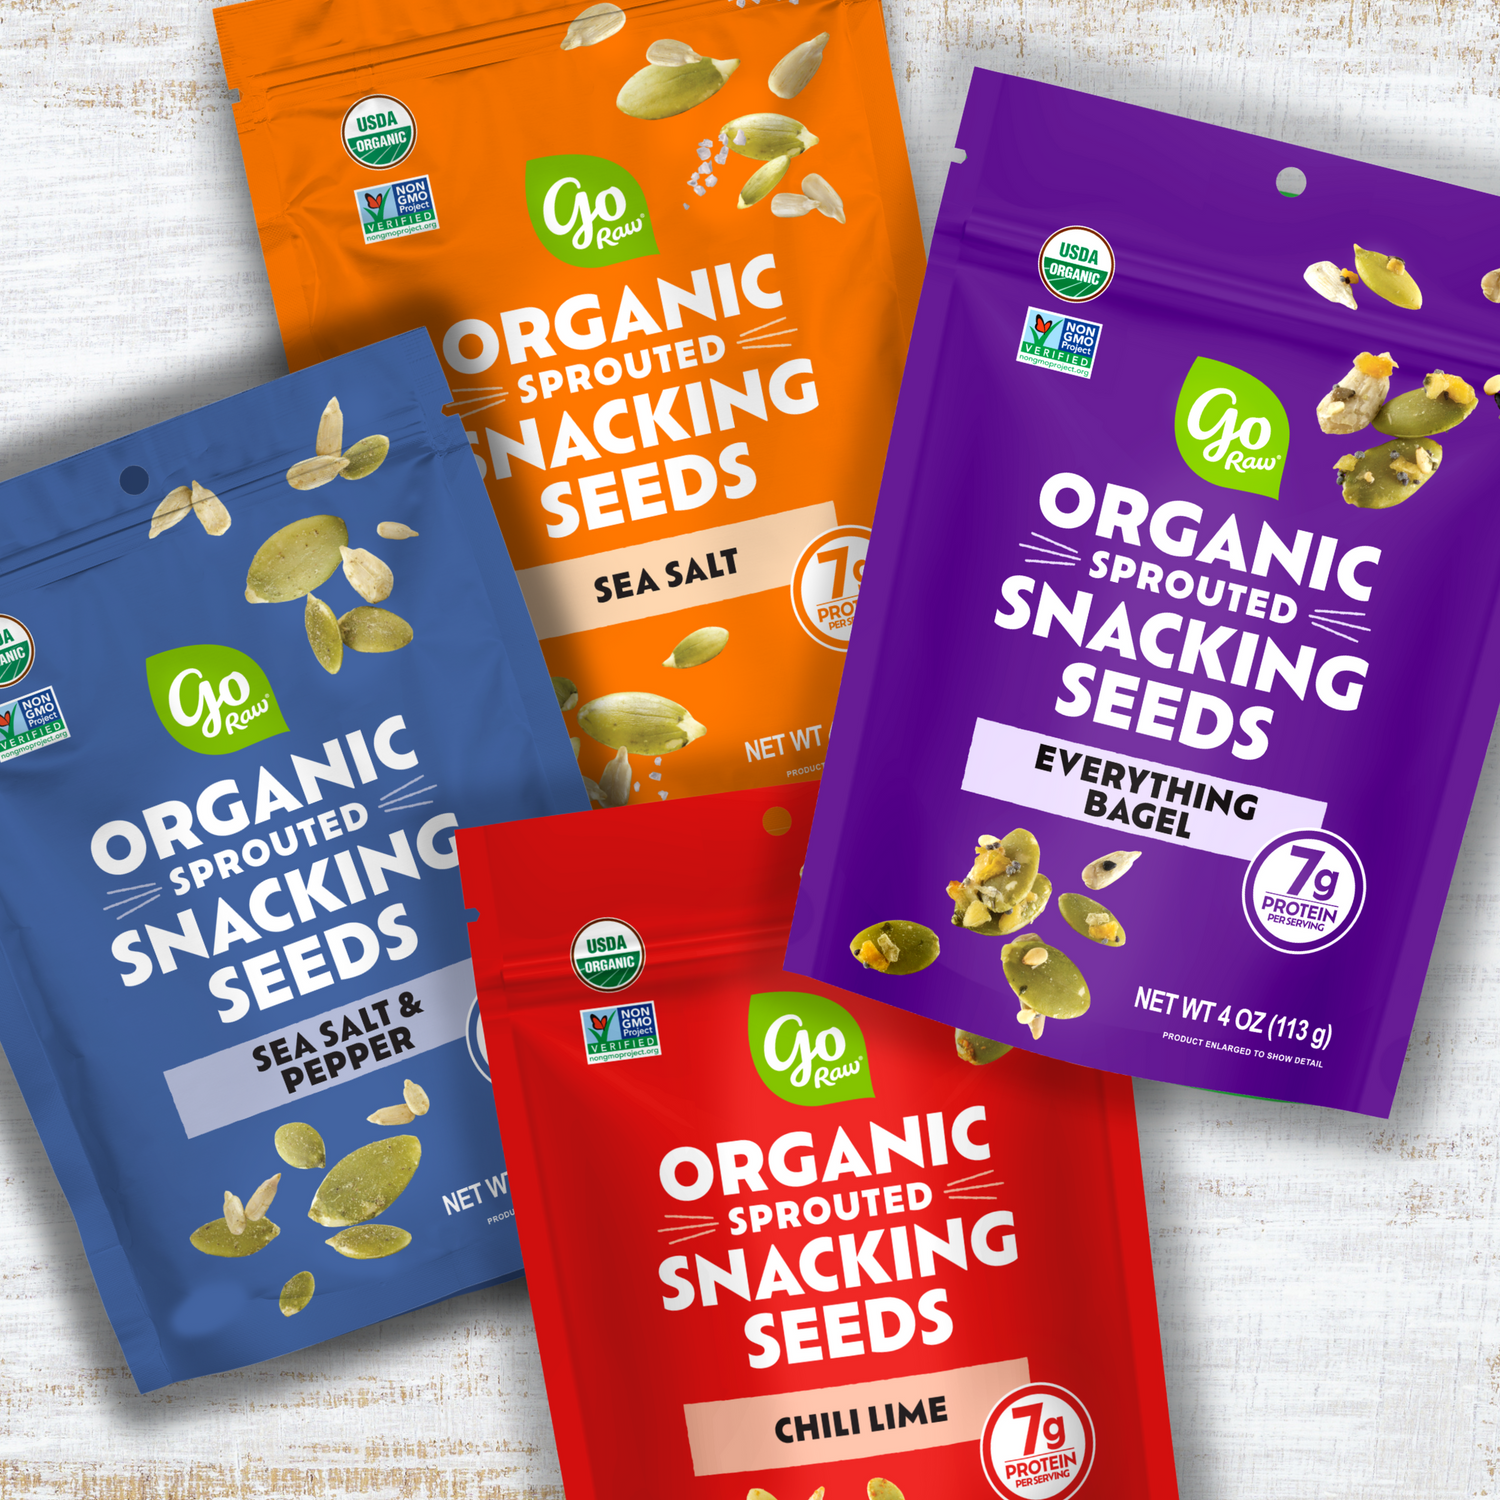 Go Raw Sprouted Snacking Seeds